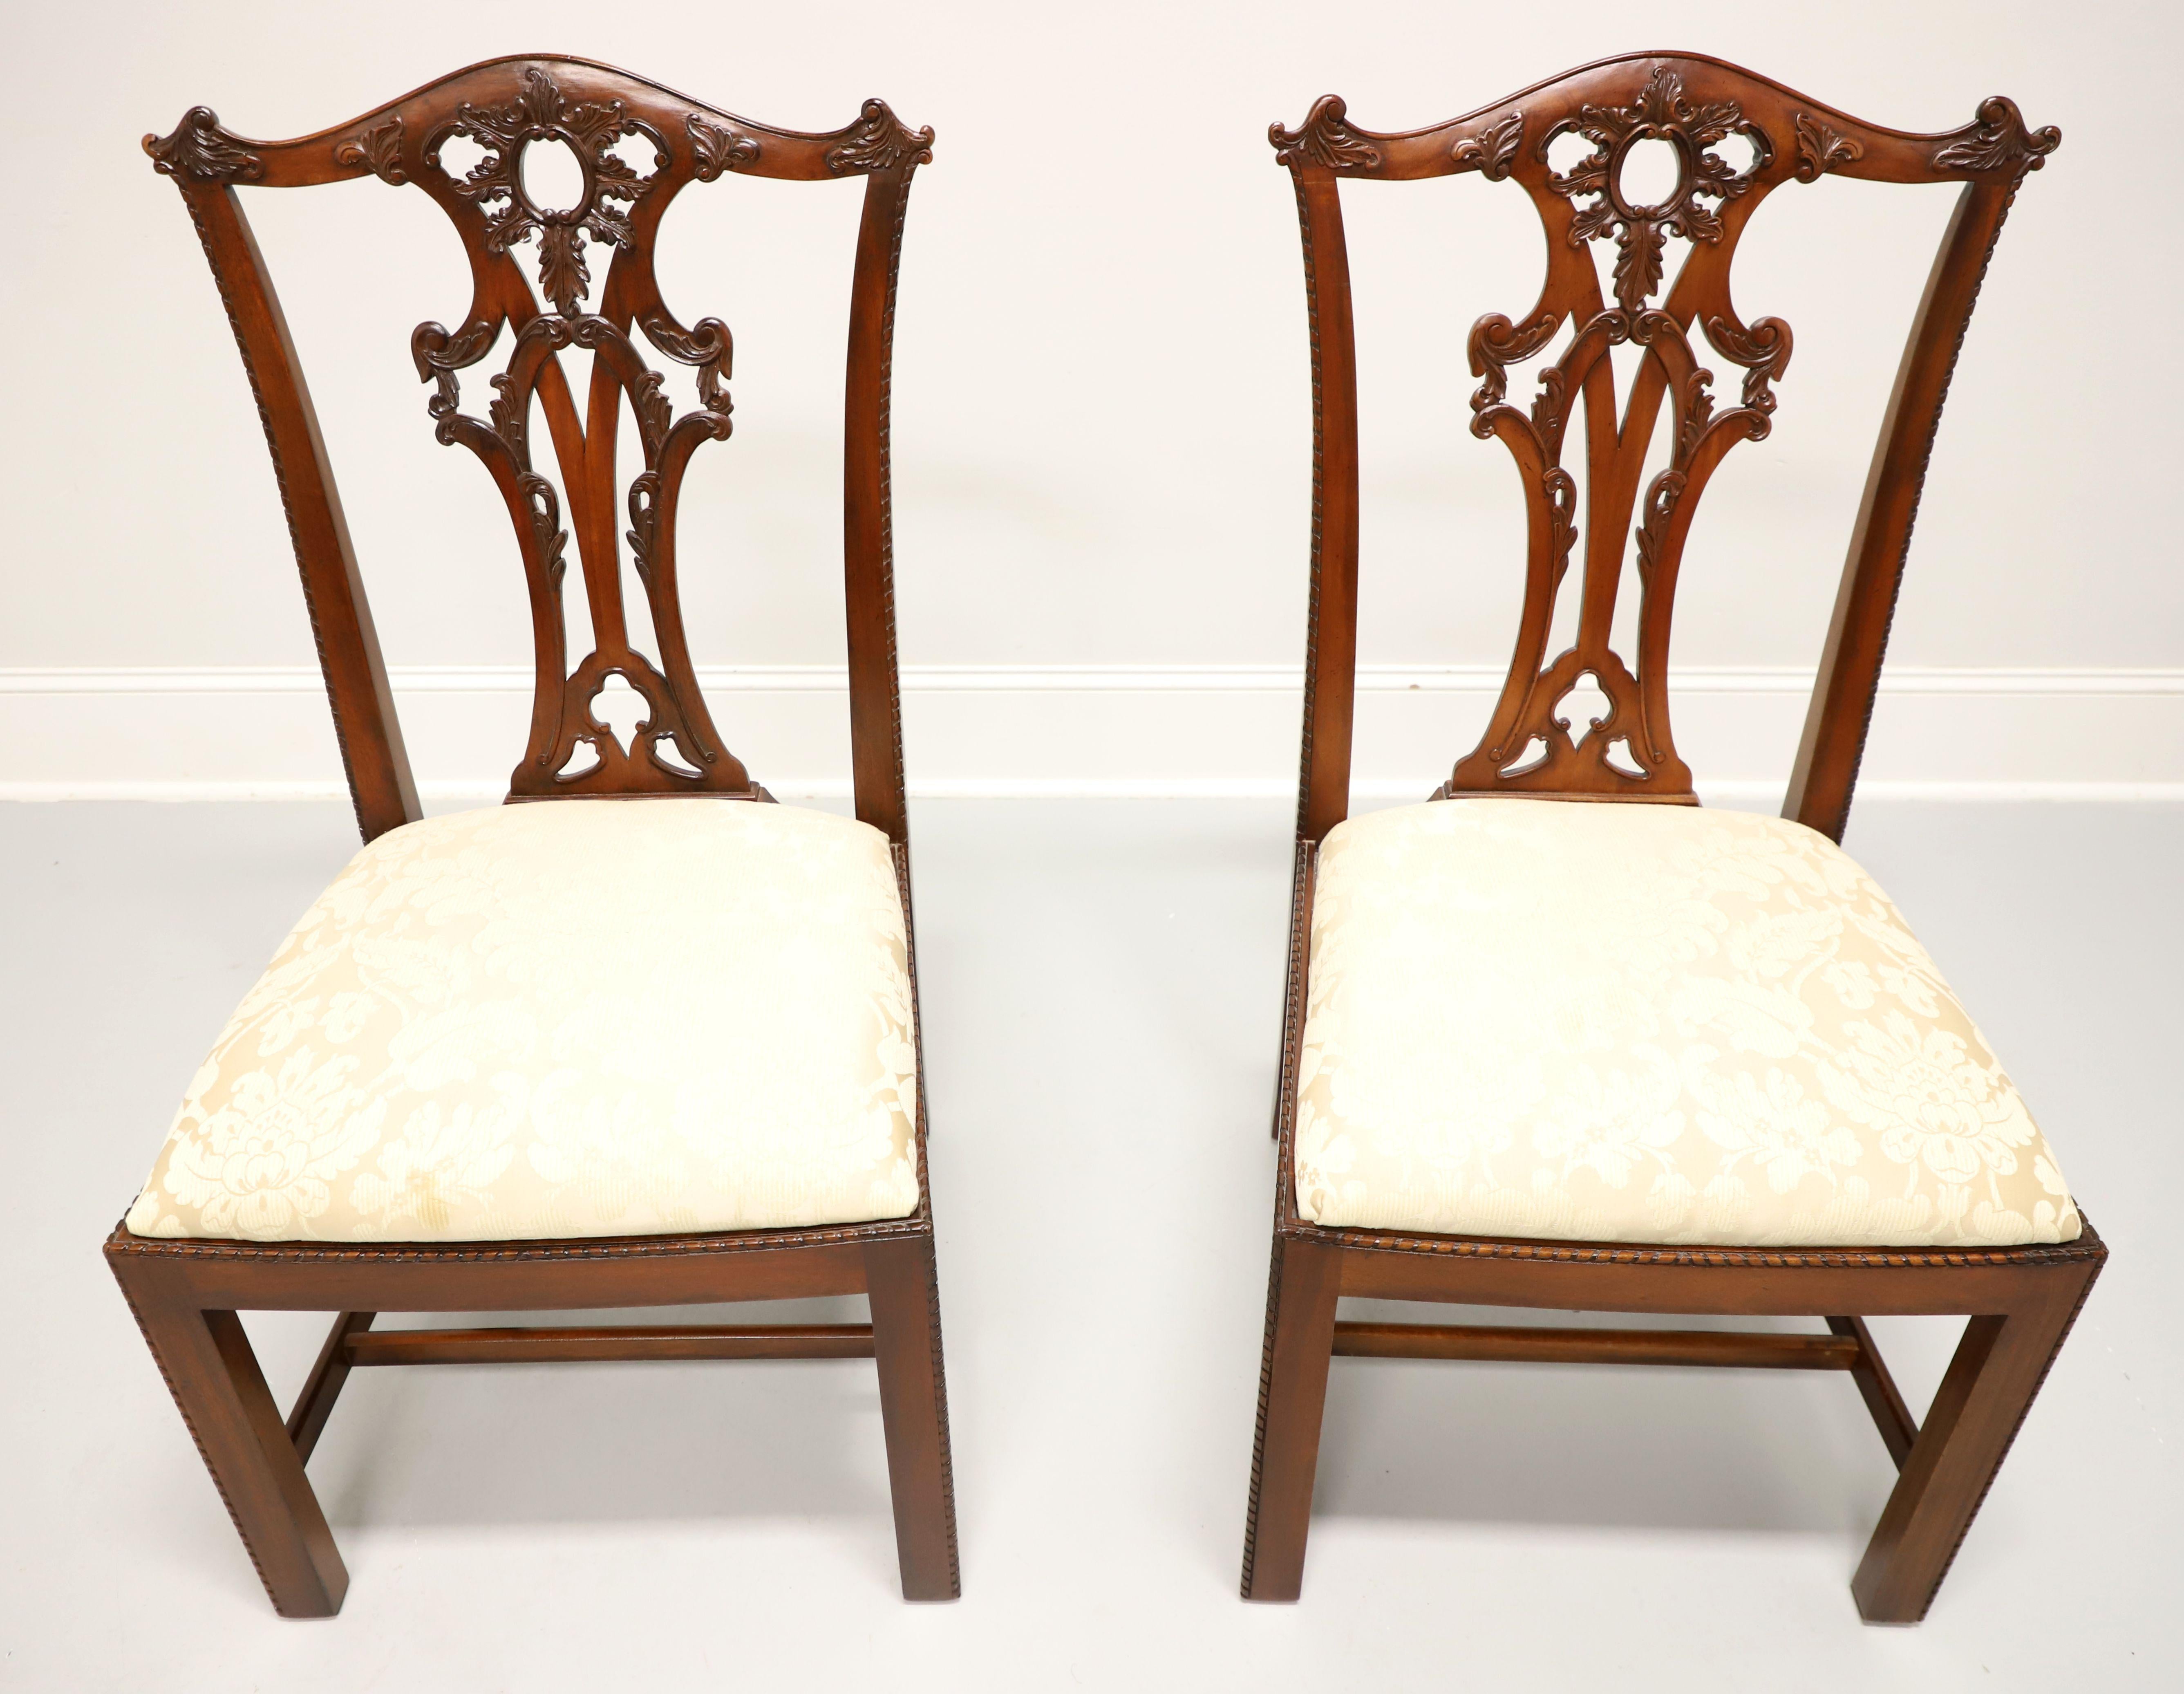 A pair of Chippendale style dining side chairs by Henredon. Solid mahogany with decoratively carved crest rail, back rest, carved beading to edge of stiles, seat edge & edges of the front straight legs with stretchers. Seat upholstered in a neutral